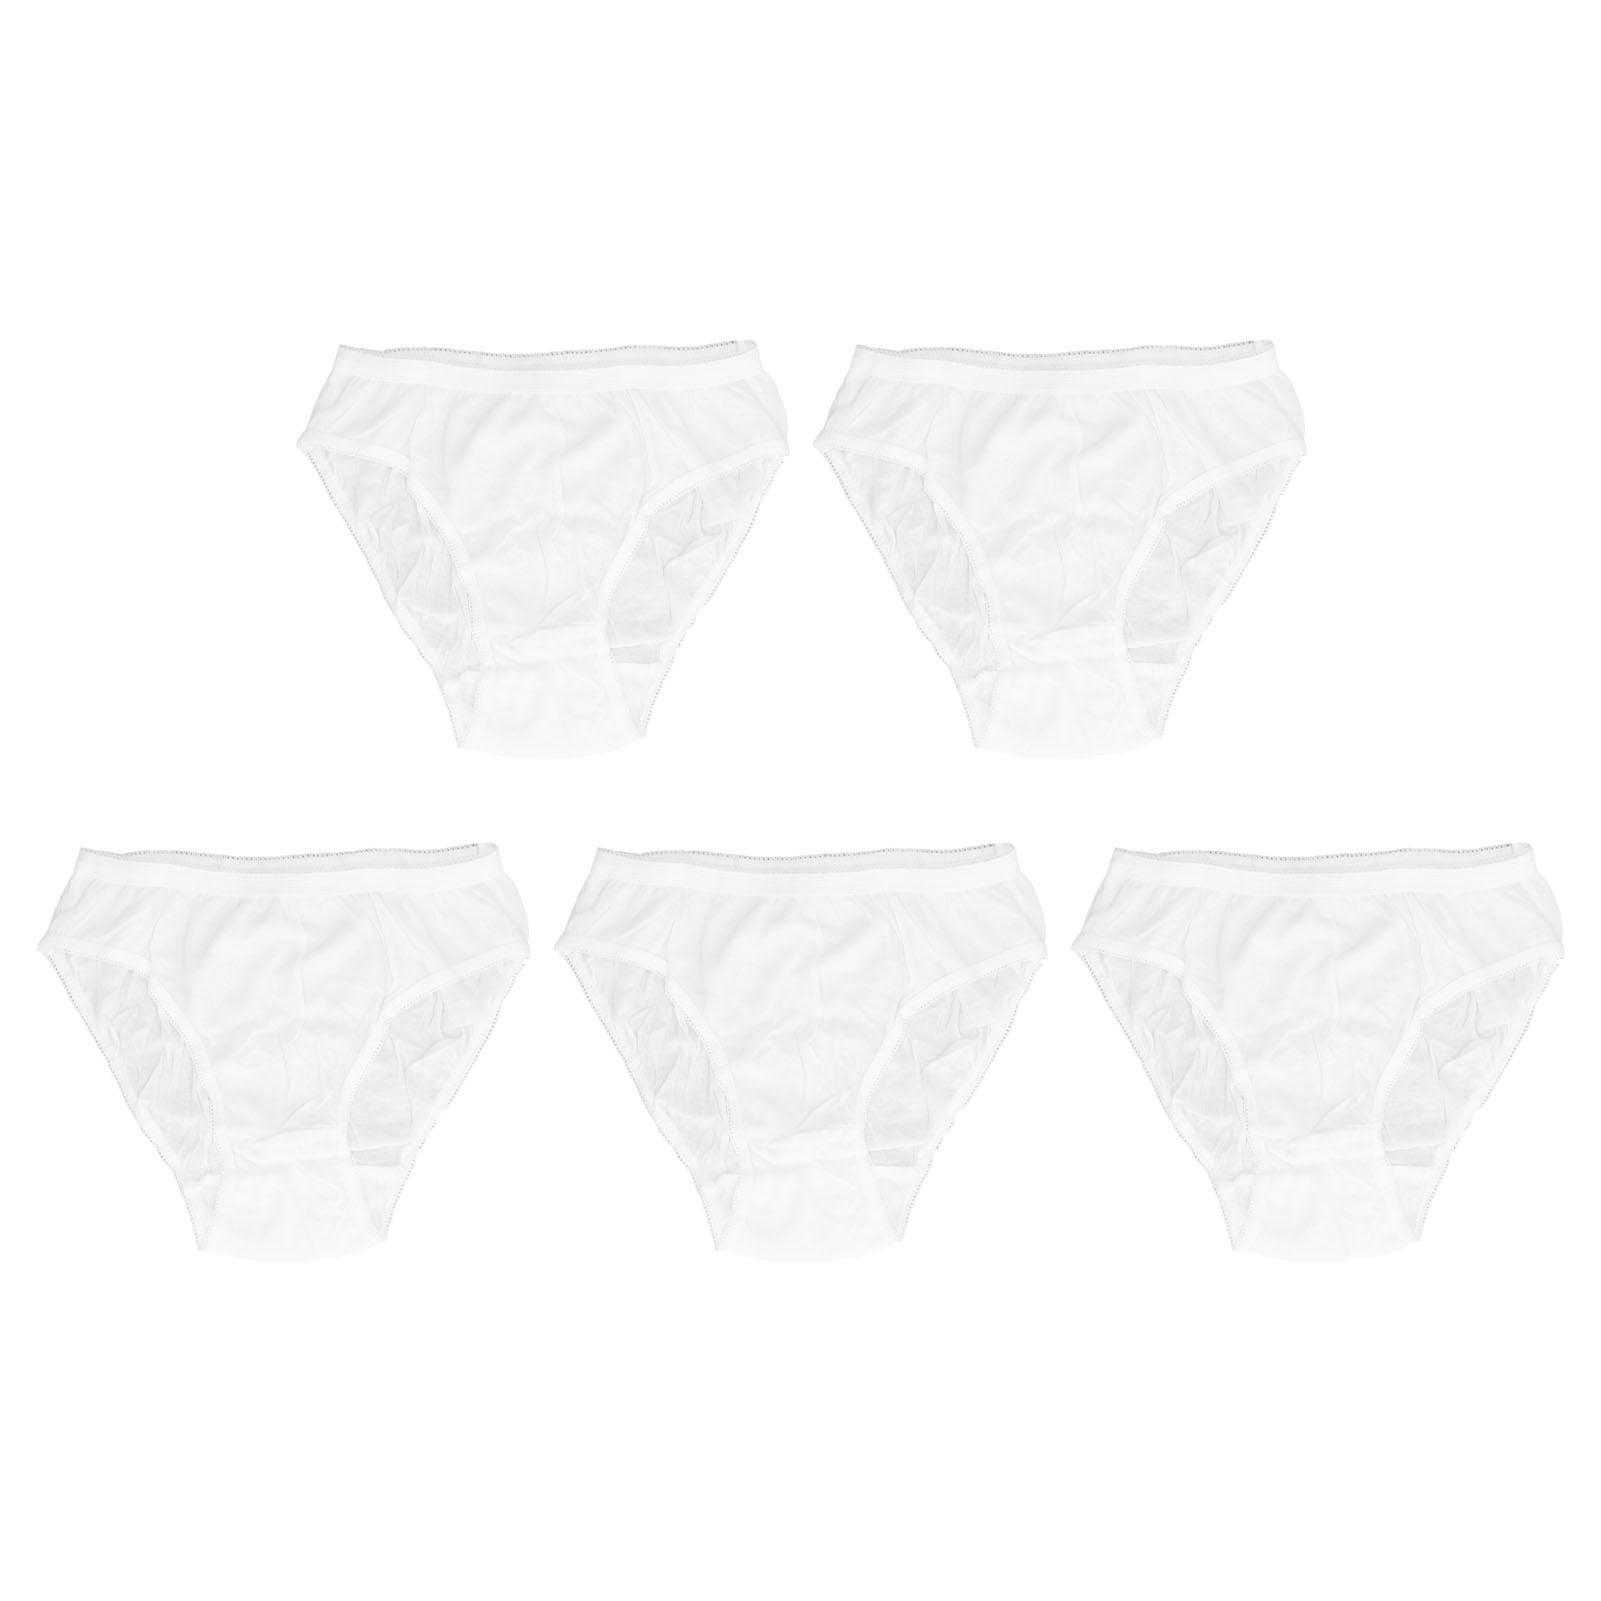 Disposable Cotton Pantie, Double Layer Crotch Protector Disposable  Underwear With High Elastic Waistband For Predelivery For 